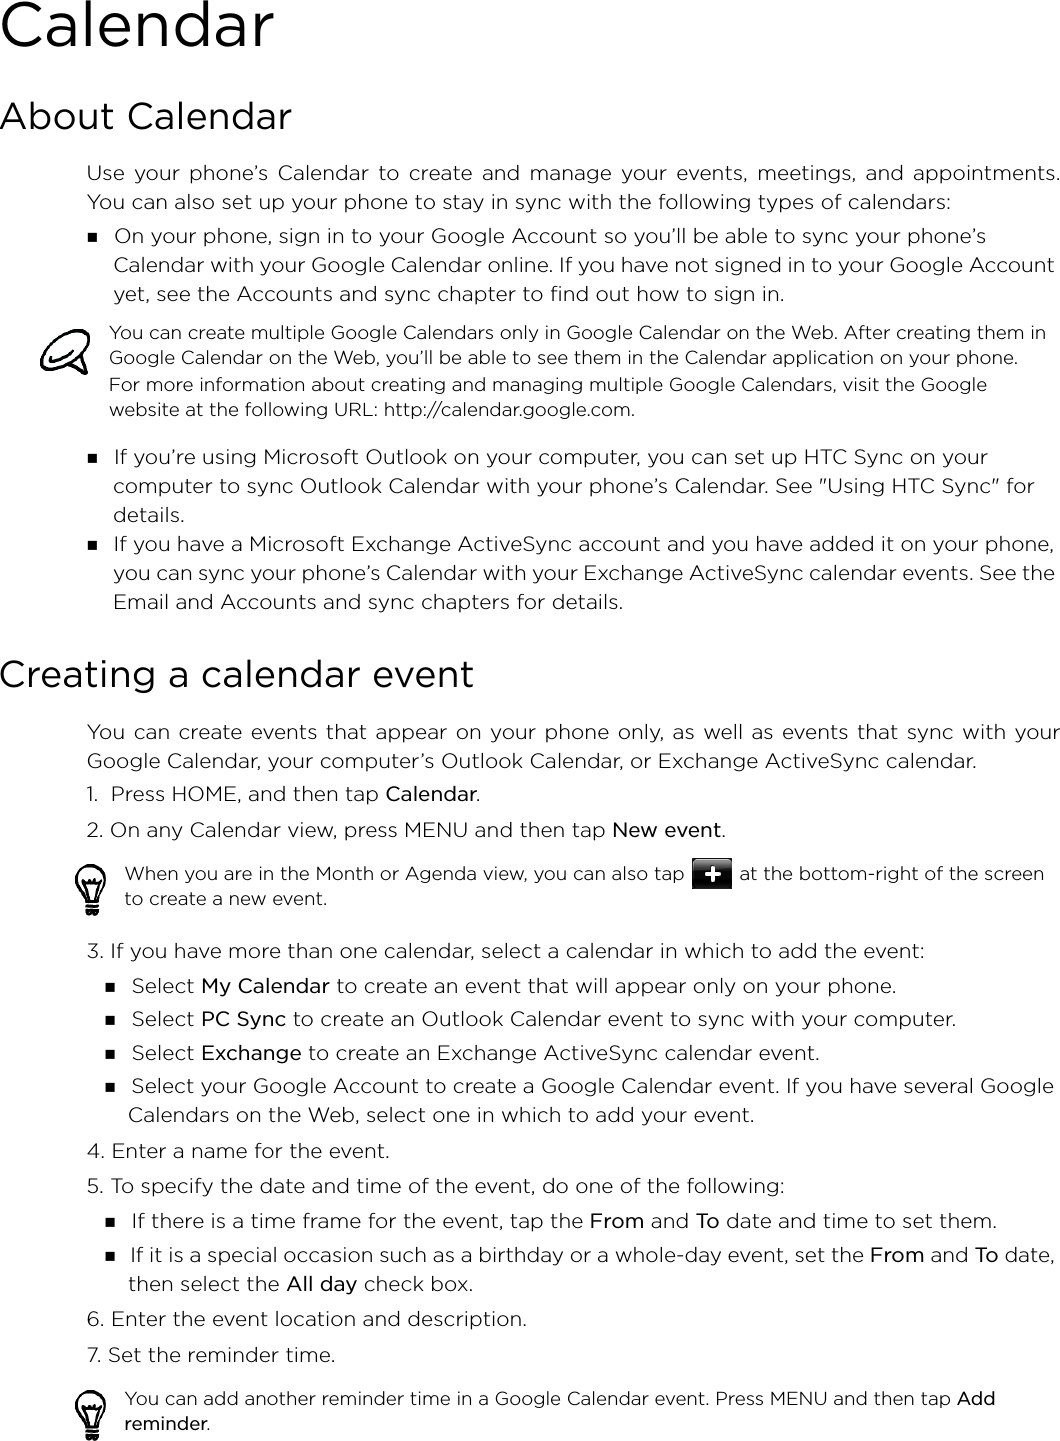 CalendarAbout CalendarUse your phone’s Calendar to create and manage your events, meetings, and appointments.You can also set up your phone to stay in sync with the following types of calendars: On your phone, sign in to your Google Account so you’ll be able to sync your phone’s Calendar with your Google Calendar online. If you have not signed in to your Google Account yet, see the Accounts and sync chapter to find out how to sign in. If you’re using Microsoft Outlook on your computer, you can set up HTC Sync on your computer to sync Outlook Calendar with your phone’s Calendar. See &quot;Using HTC Sync&quot; for details. If you have a Microsoft Exchange ActiveSync account and you have added it on your phone, you can sync your phone’s Calendar with your Exchange ActiveSync calendar events. See the Email and Accounts and sync chapters for details.Creating a calendar eventYou can create events that appear on your phone only, as well as events that sync with yourGoogle Calendar, your computer’s Outlook Calendar, or Exchange ActiveSync calendar.1.  Press HOME, and then tap Calendar.2. On any Calendar view, press MENU and then tap New event.3. If you have more than one calendar, select a calendar in which to add the event: Select My Calendar to create an event that will appear only on your phone. Select PC Sync to create an Outlook Calendar event to sync with your computer. Select Exchange to create an Exchange ActiveSync calendar event. Select your Google Account to create a Google Calendar event. If you have several Google Calendars on the Web, select one in which to add your event.4. Enter a name for the event.5. To specify the date and time of the event, do one of the following: If there is a time frame for the event, tap the From and To date and time to set them. If it is a special occasion such as a birthday or a whole-day event, set the From and To date, then select the All day check box.6. Enter the event location and description.7. Set the reminder time.You can create multiple Google Calendars only in Google Calendar on the Web. After creating them in Google Calendar on the Web, you’ll be able to see them in the Calendar application on your phone.For more information about creating and managing multiple Google Calendars, visit the Google website at the following URL: http://calendar.google.com.When you are in the Month or Agenda view, you can also tap  at the bottom-right of the screen to create a new event.You can add another reminder time in a Google Calendar event. Press MENU and then tap Add reminder.